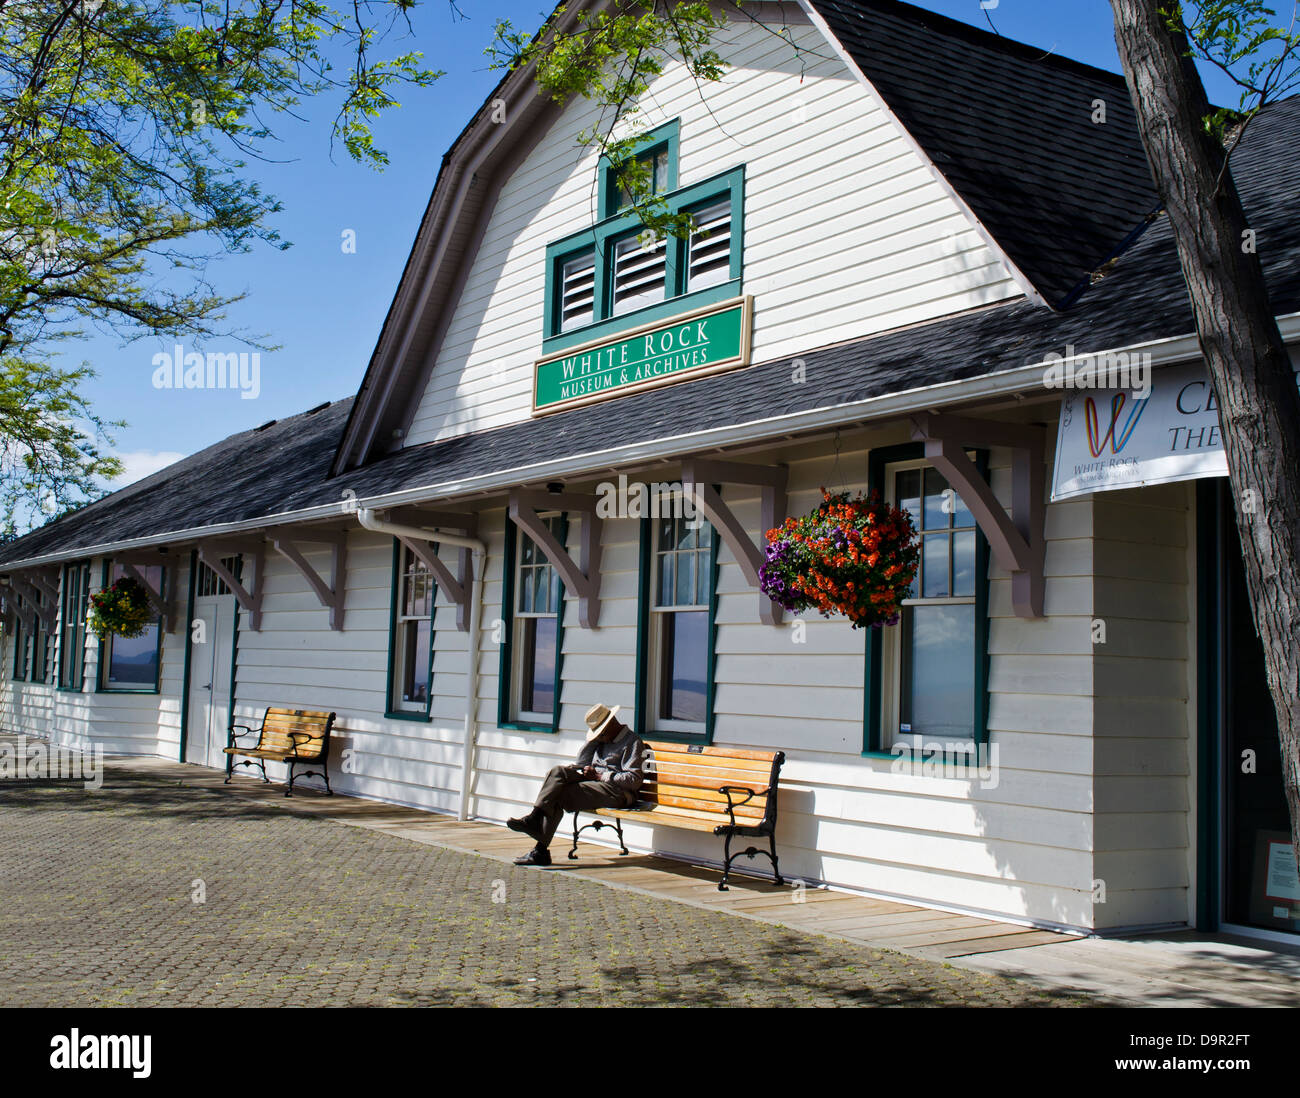 Man on a bench taking a nap in the sunshine by the White Rock train museum in British Columbia, Canada. Stock Photo